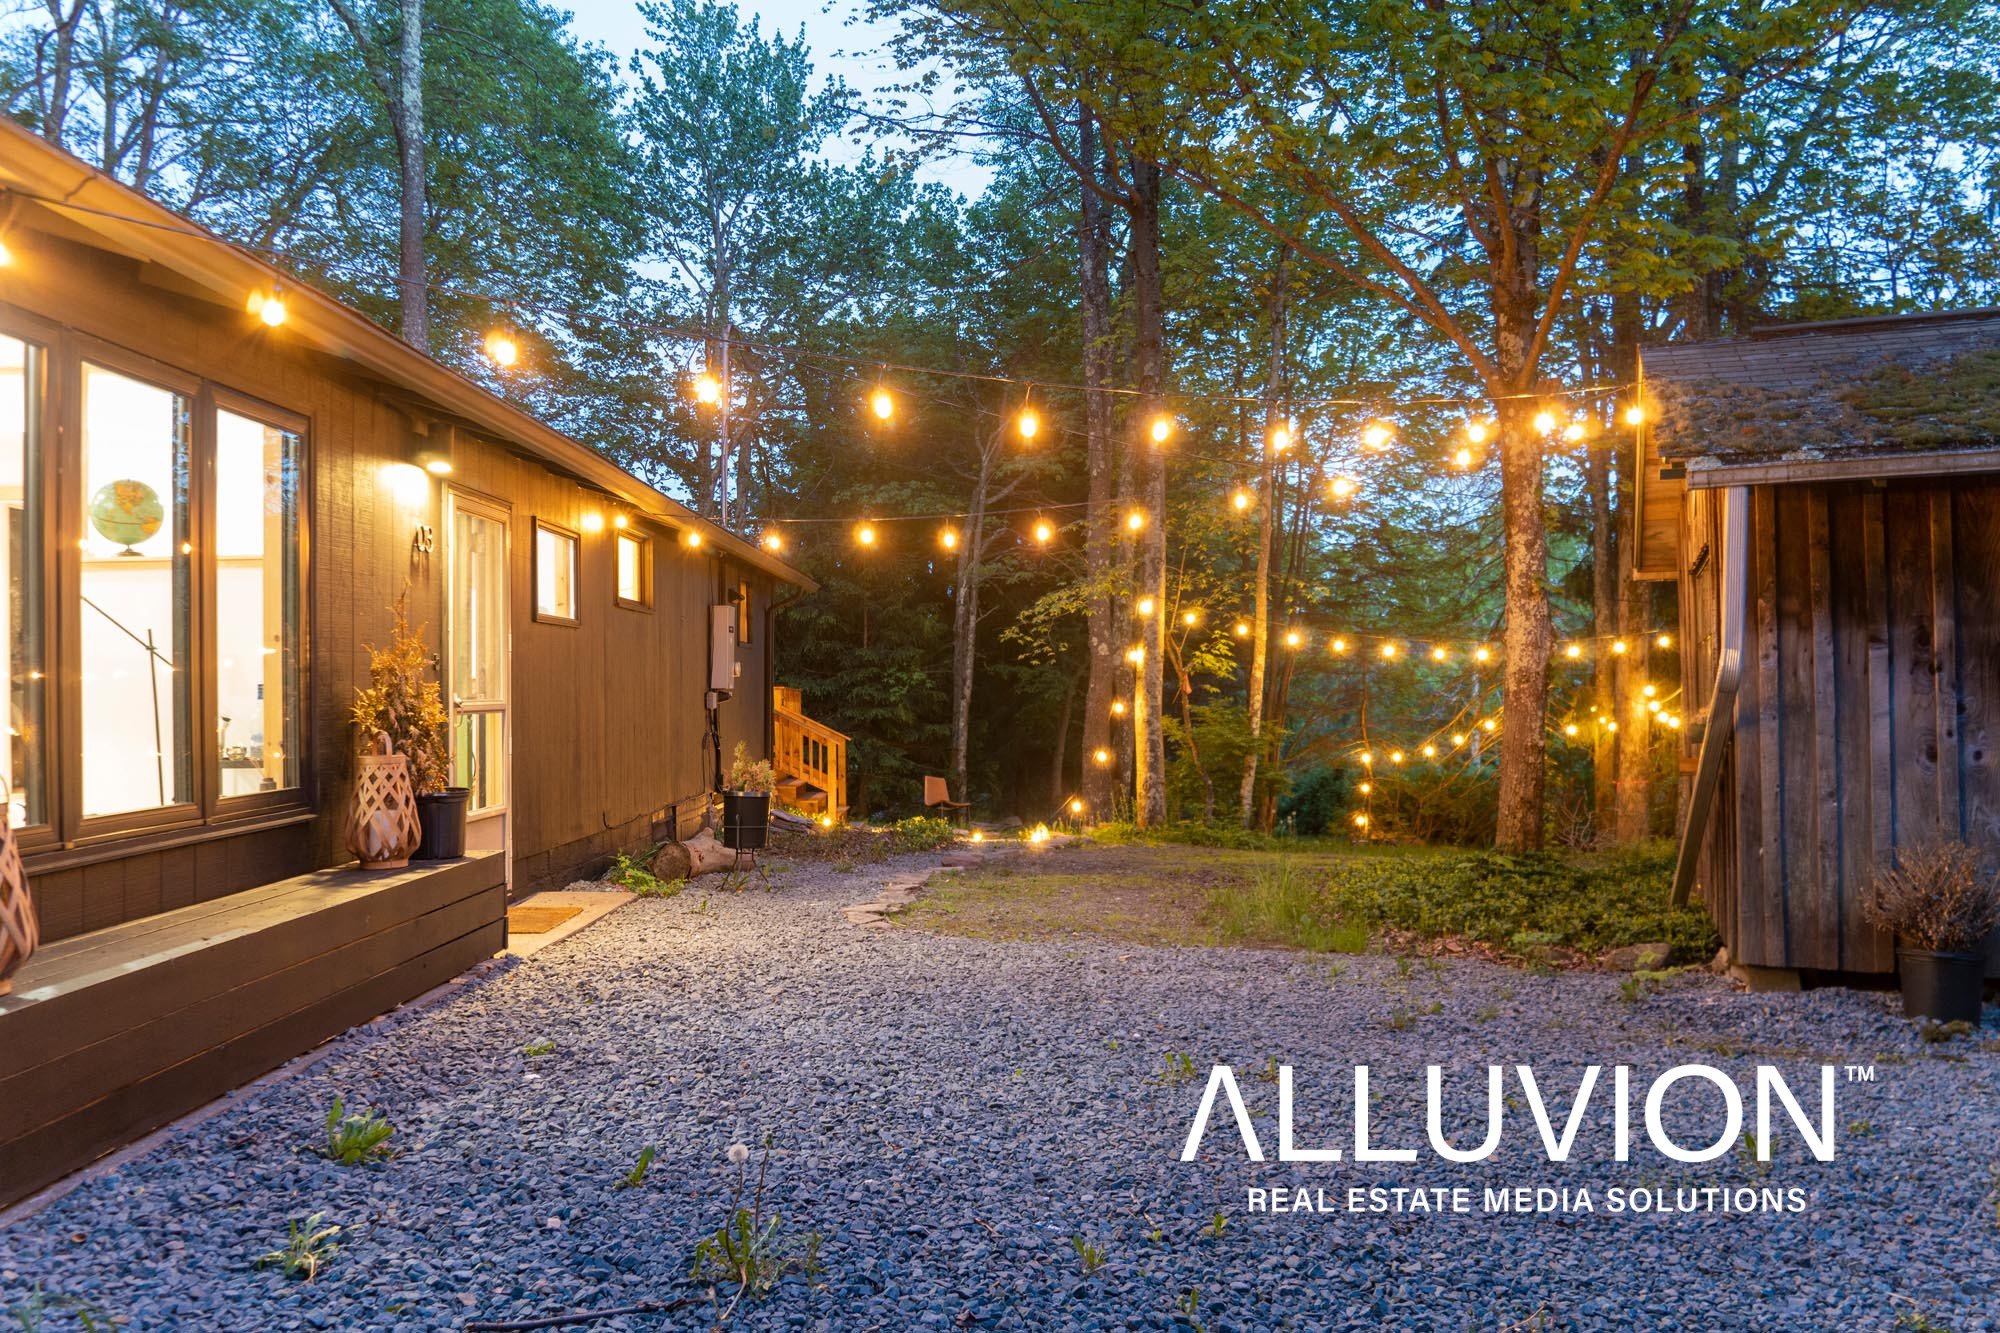 Modern Rustic Cabin in the Catskills – Airbnb Photography by Maxwell Alexander